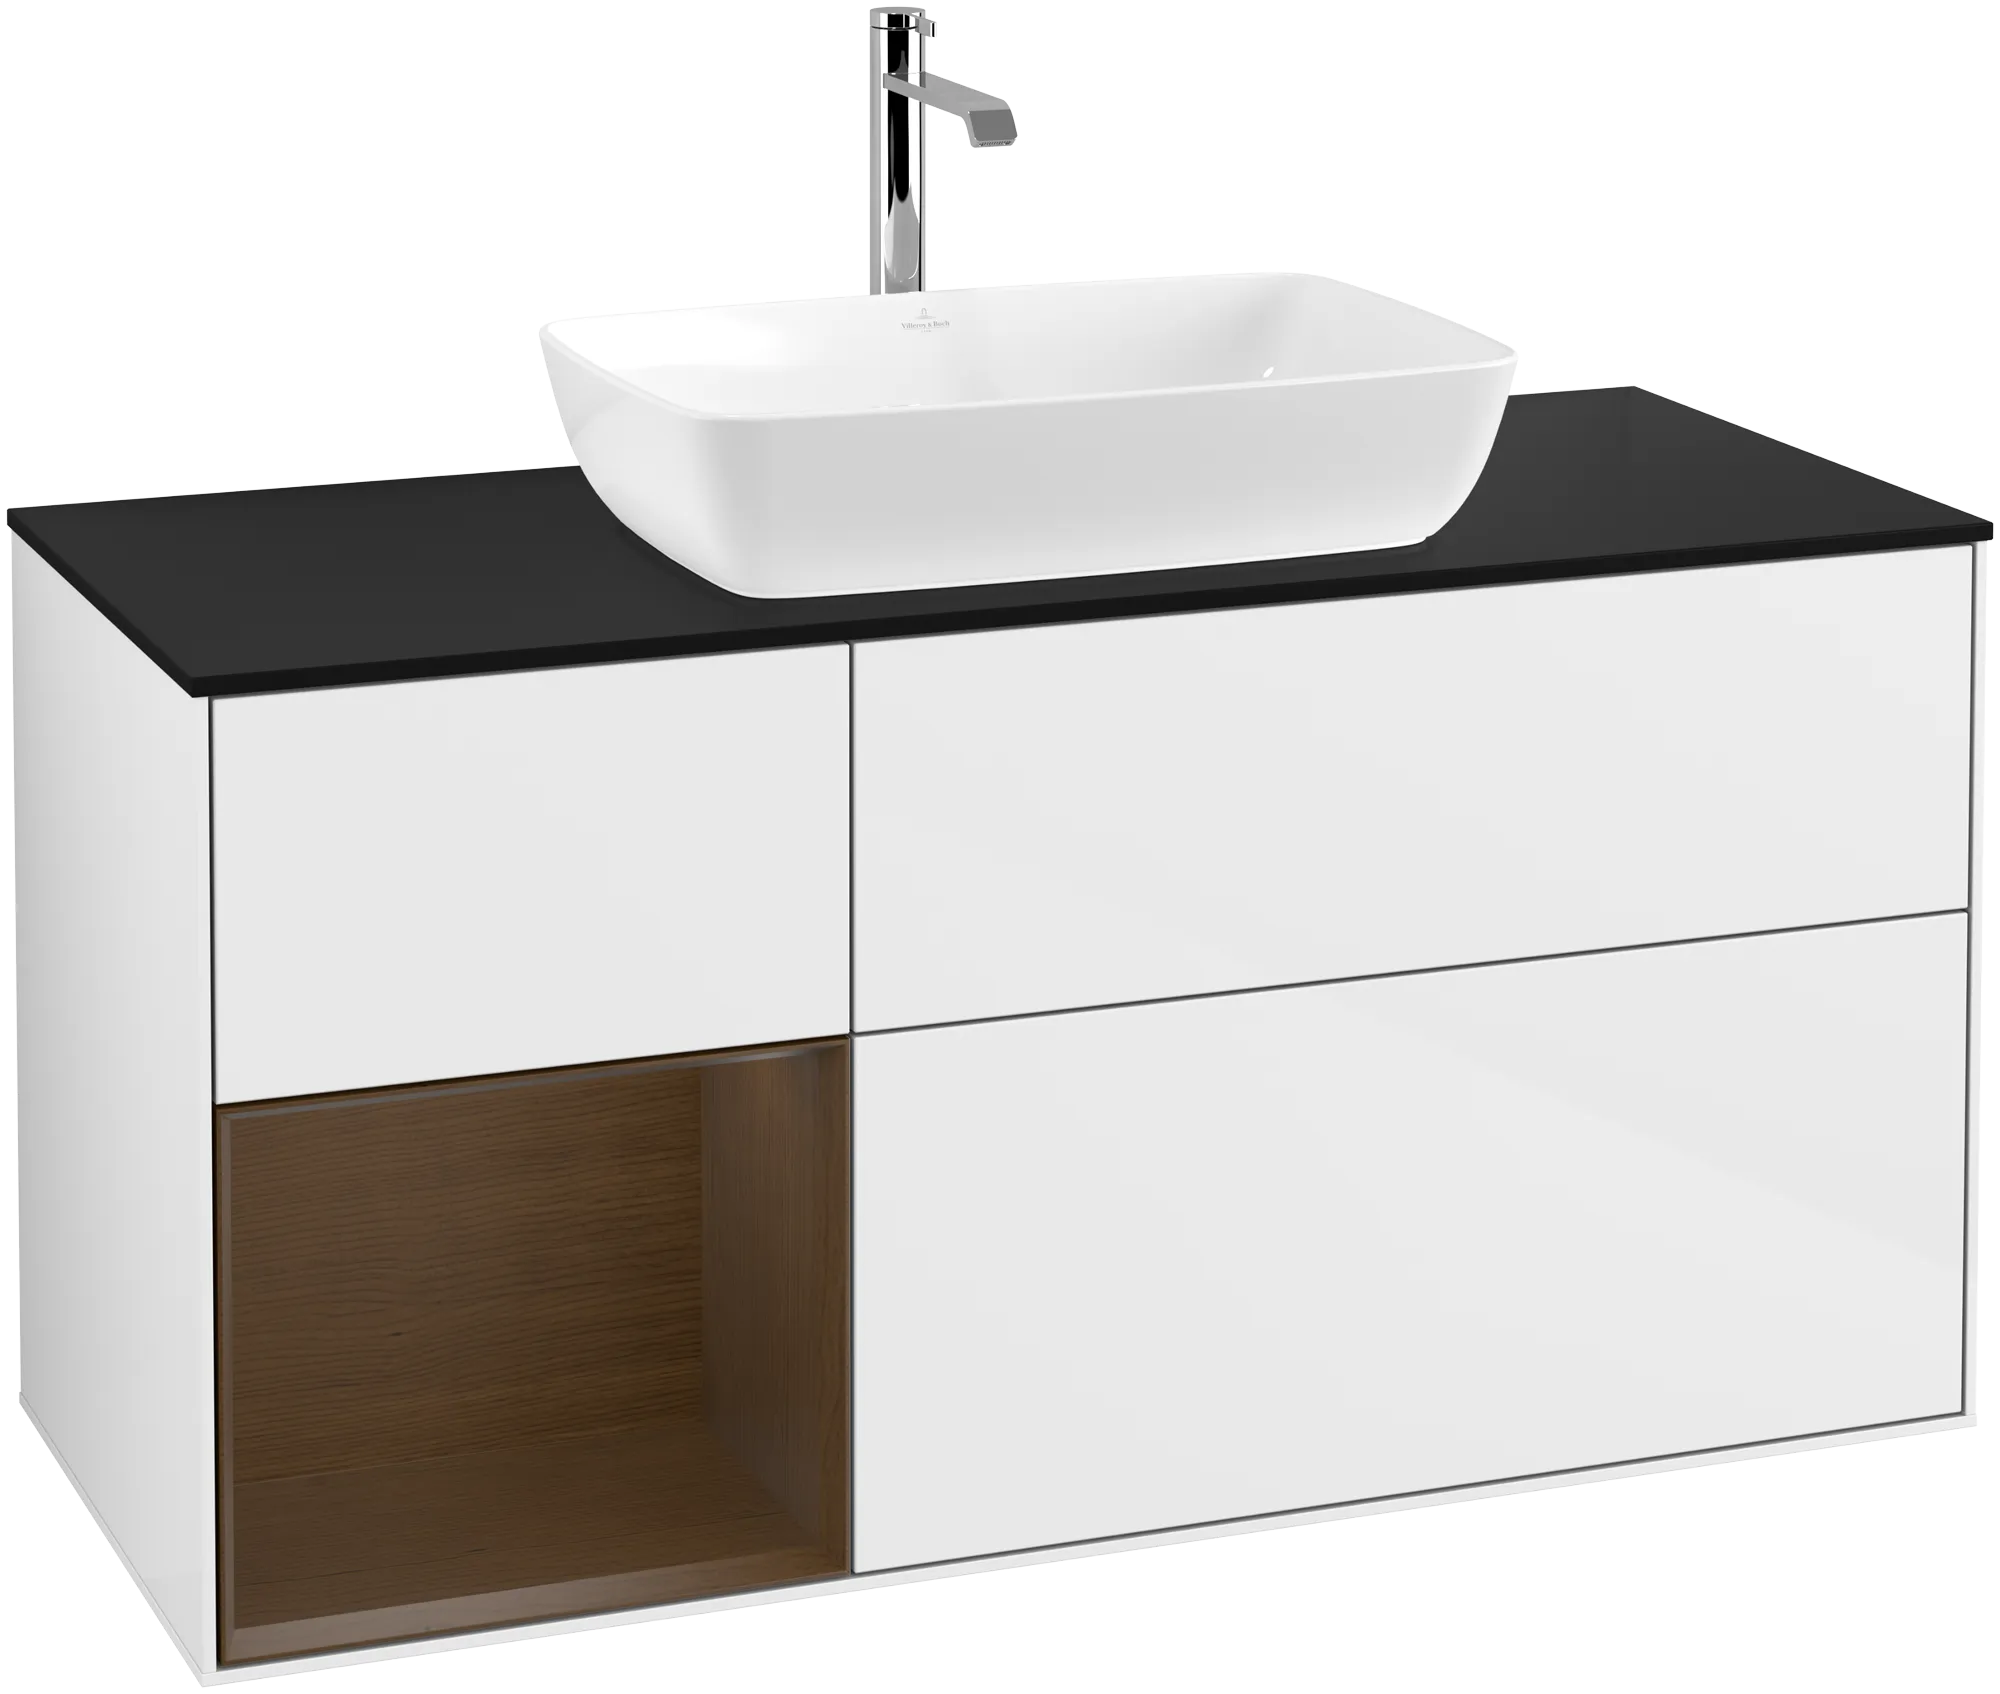 Obrázek VILLEROY BOCH Finion Vanity unit, with lighting, 3 pull-out compartments, 1200 x 603 x 501 mm, Glossy White Lacquer / Walnut Veneer / Glass Black Matt #G822GNGF